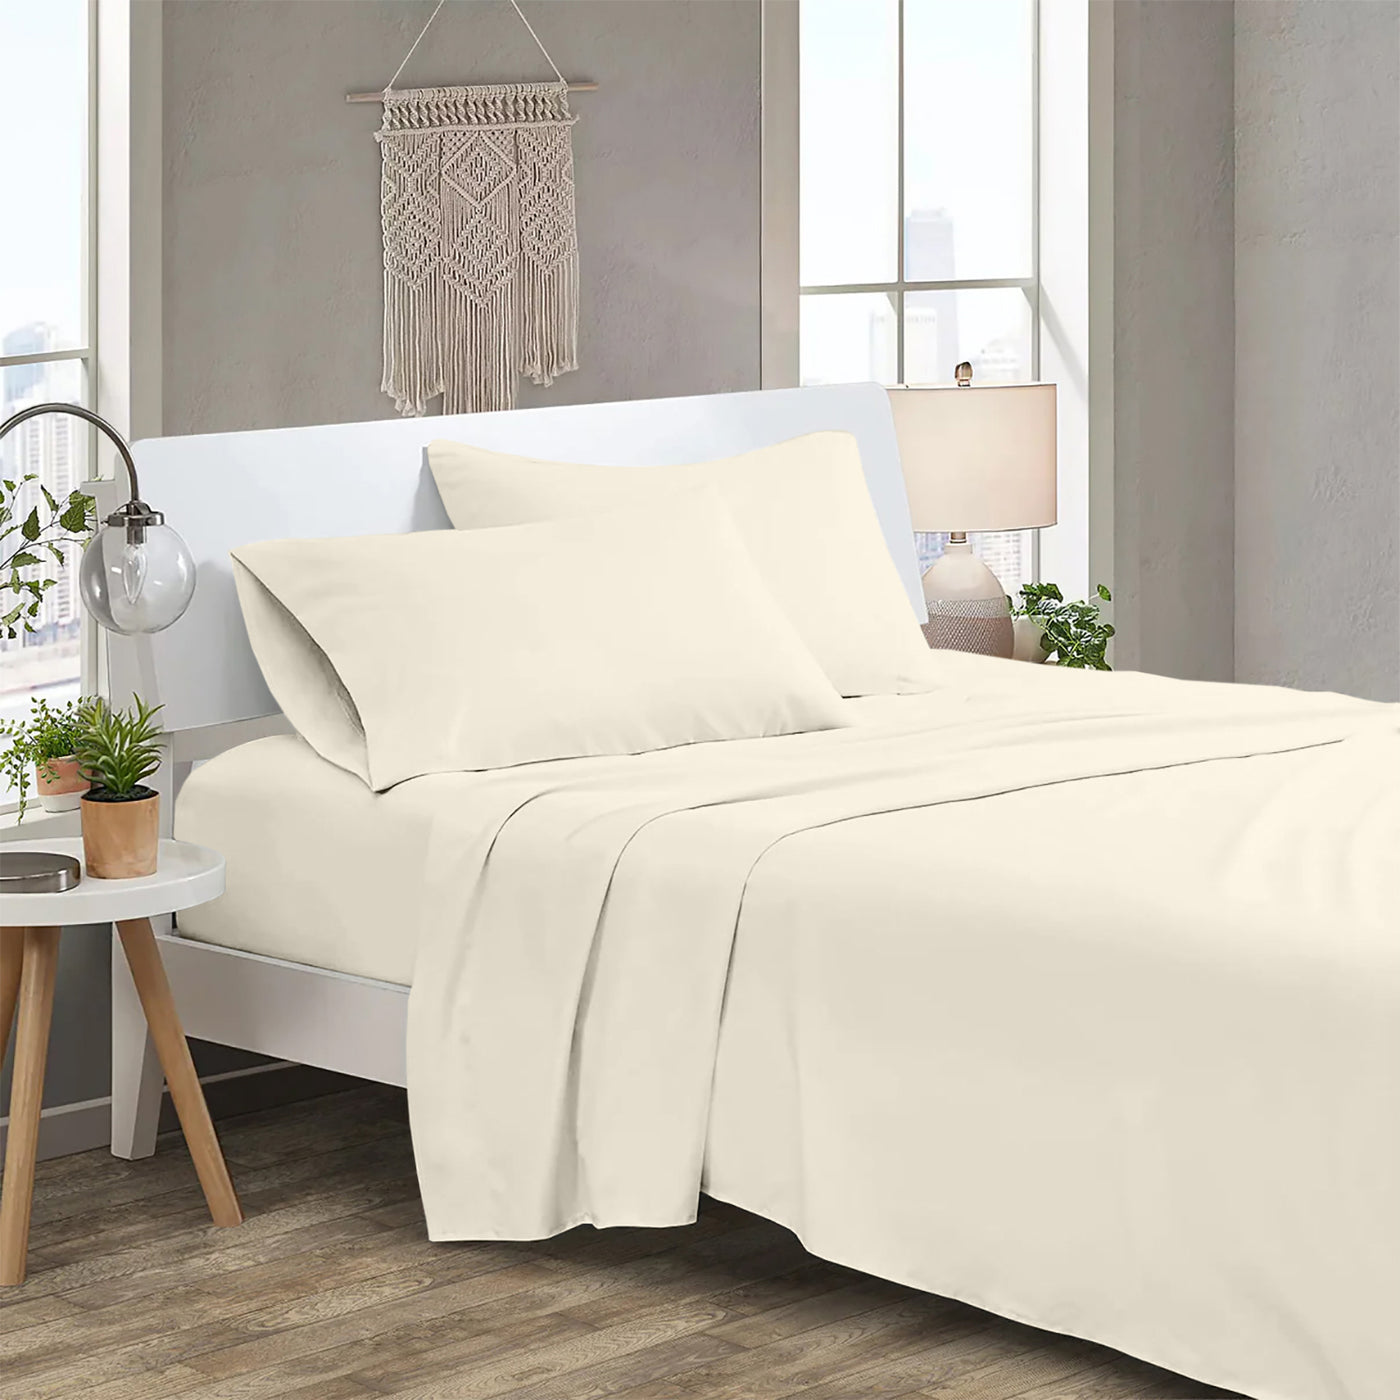 300 TC Egyptian Cotton 3 Piece Solid Flat Bed Sheet - Ivory